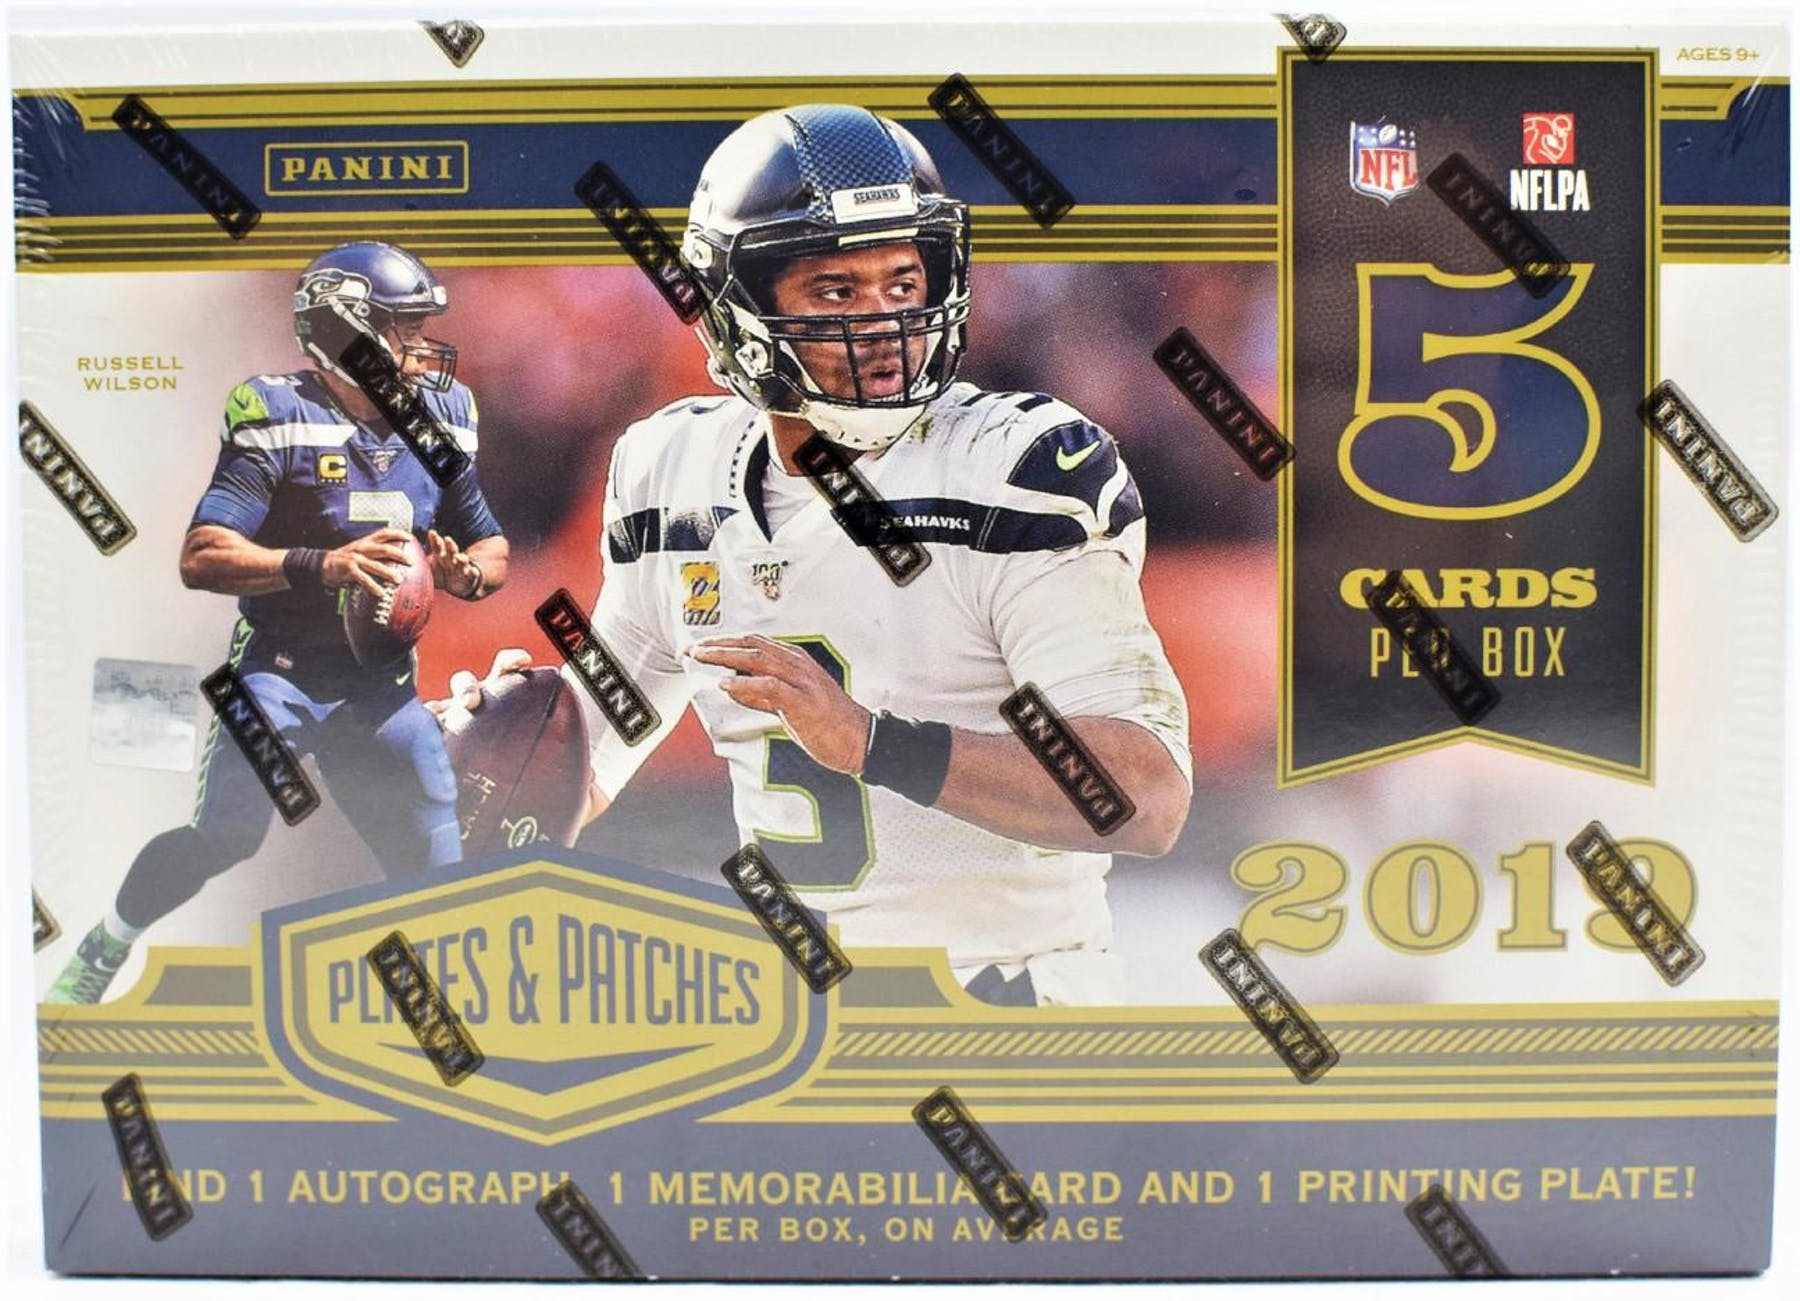 2019 Panini Plates and Patches Football Hobby Box | Eastridge Sports Cards